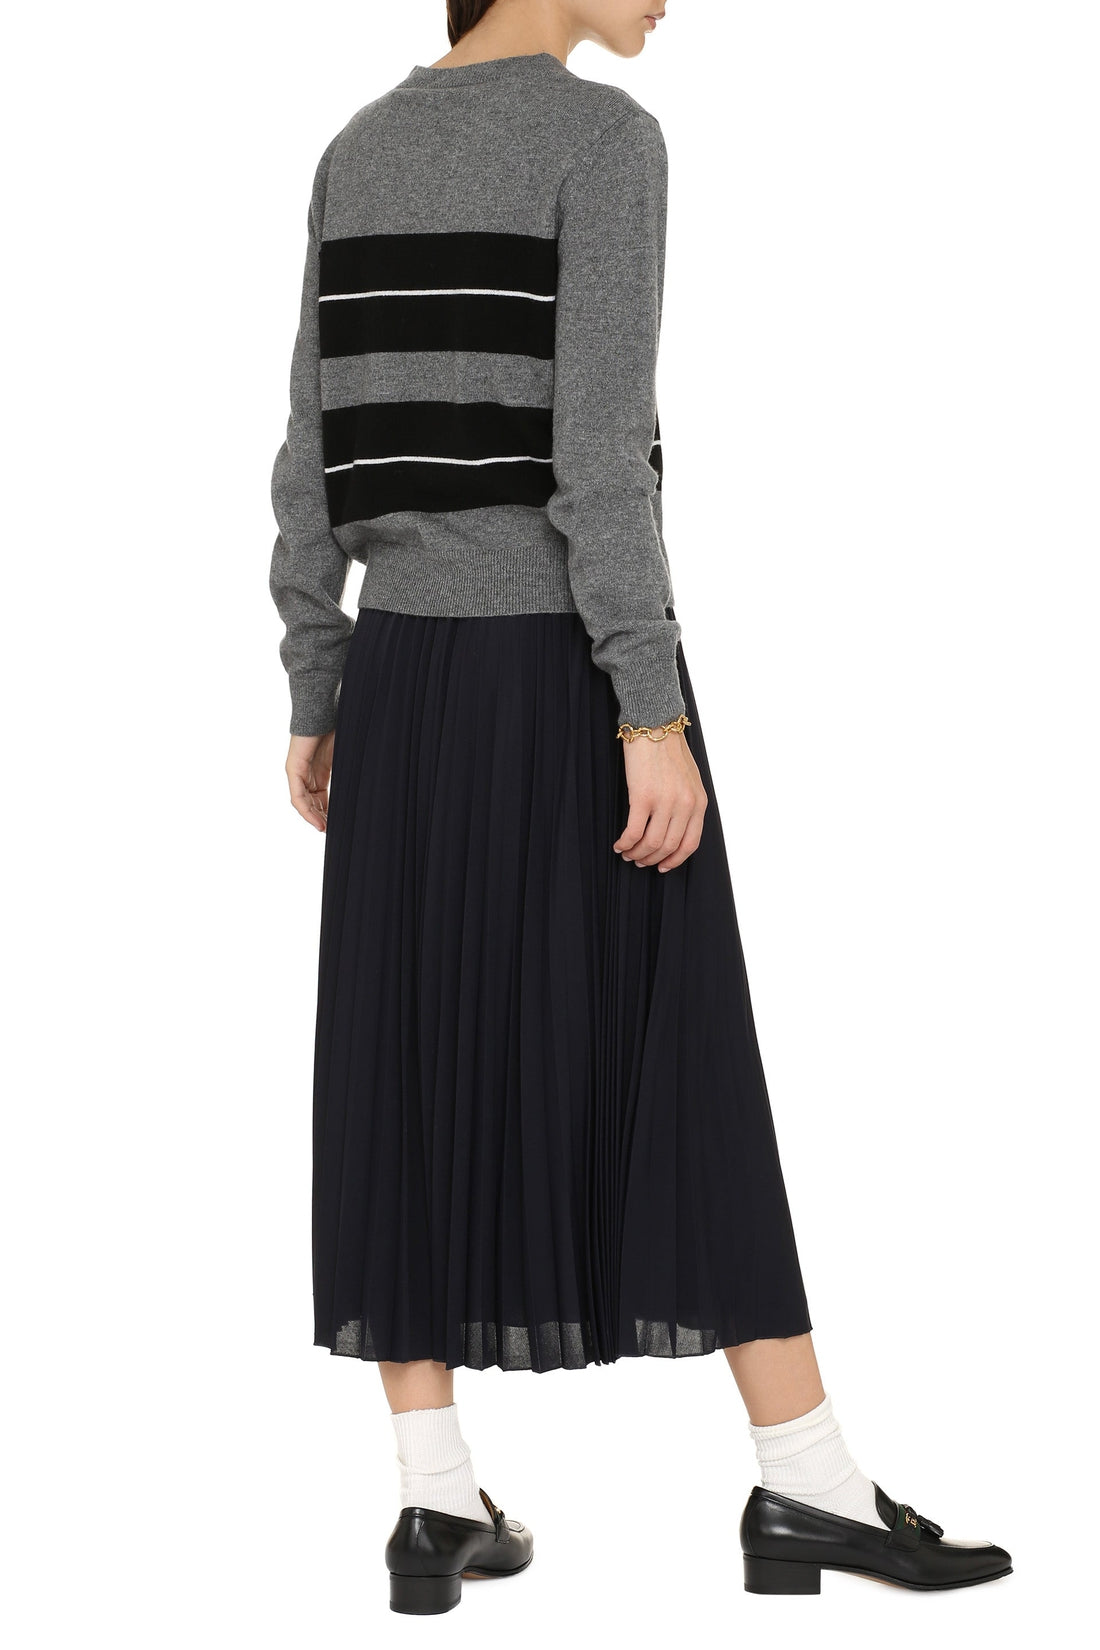 Max Mara-OUTLET-SALE-Popoli wool and cashmere sweater-ARCHIVIST